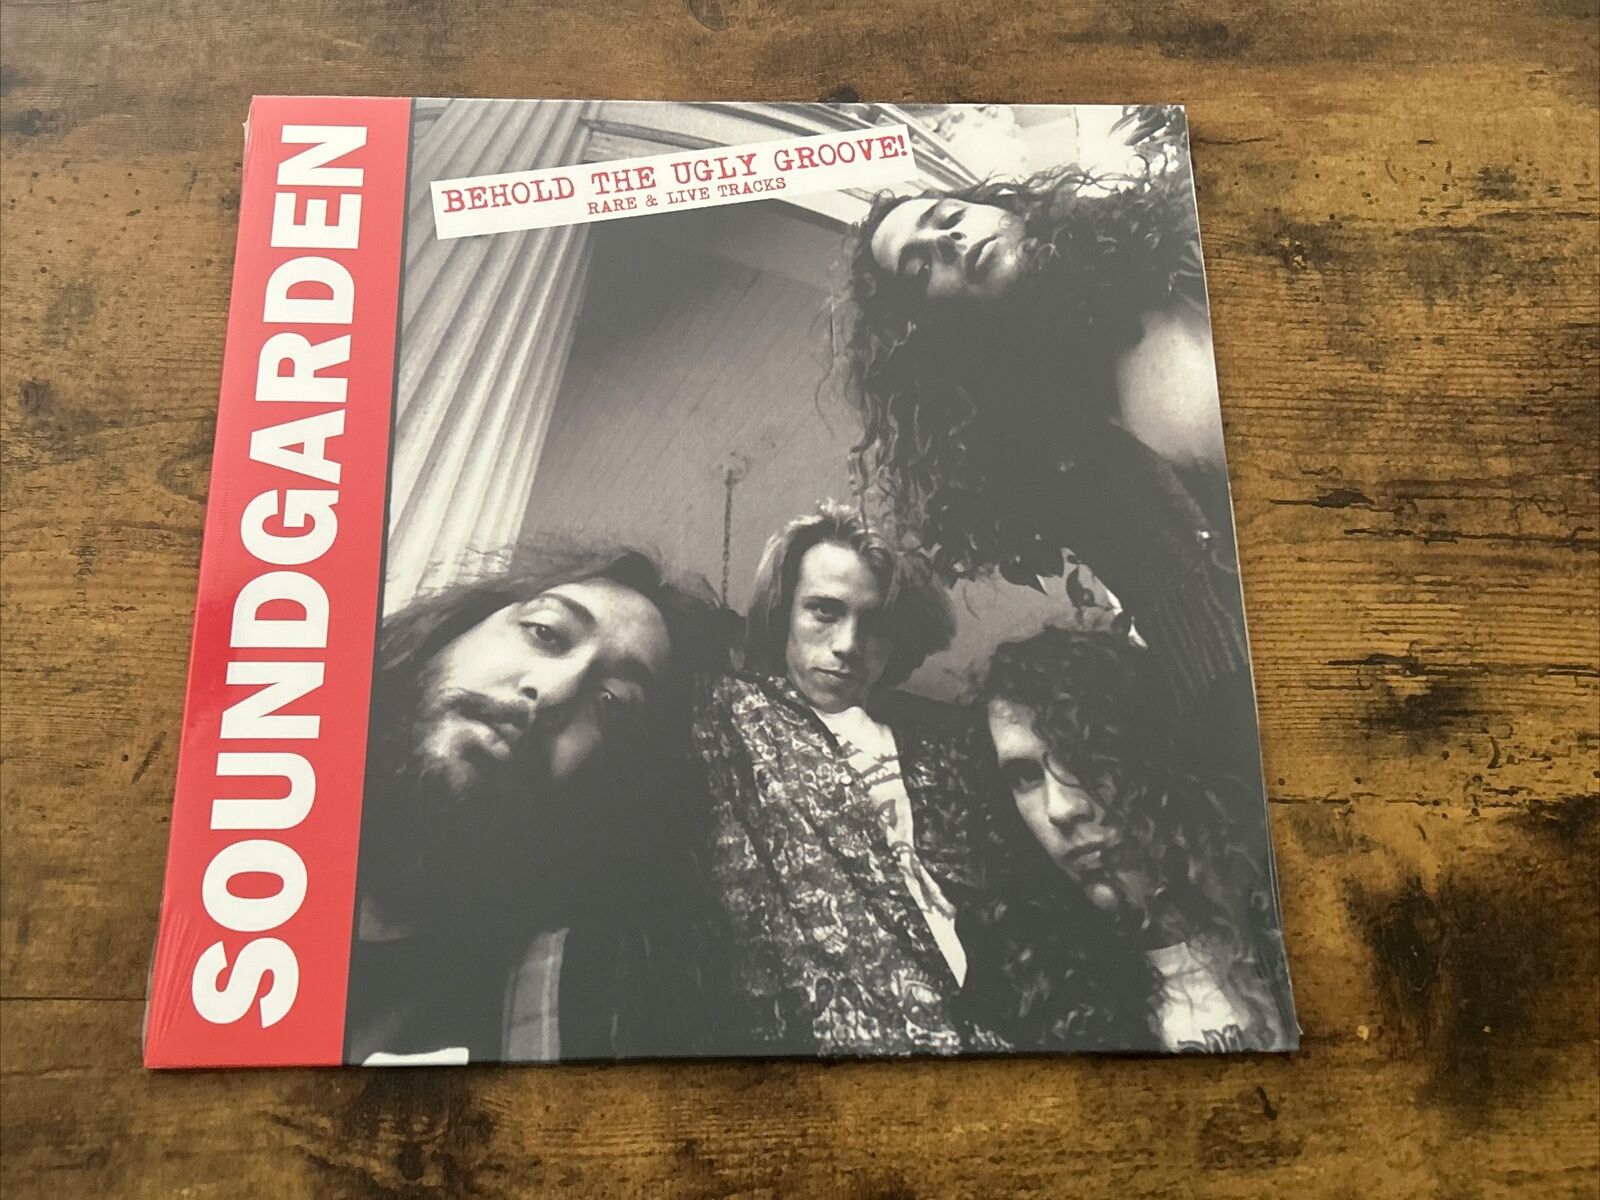 Soundgarden Behold The Ugly Groove Sealed New